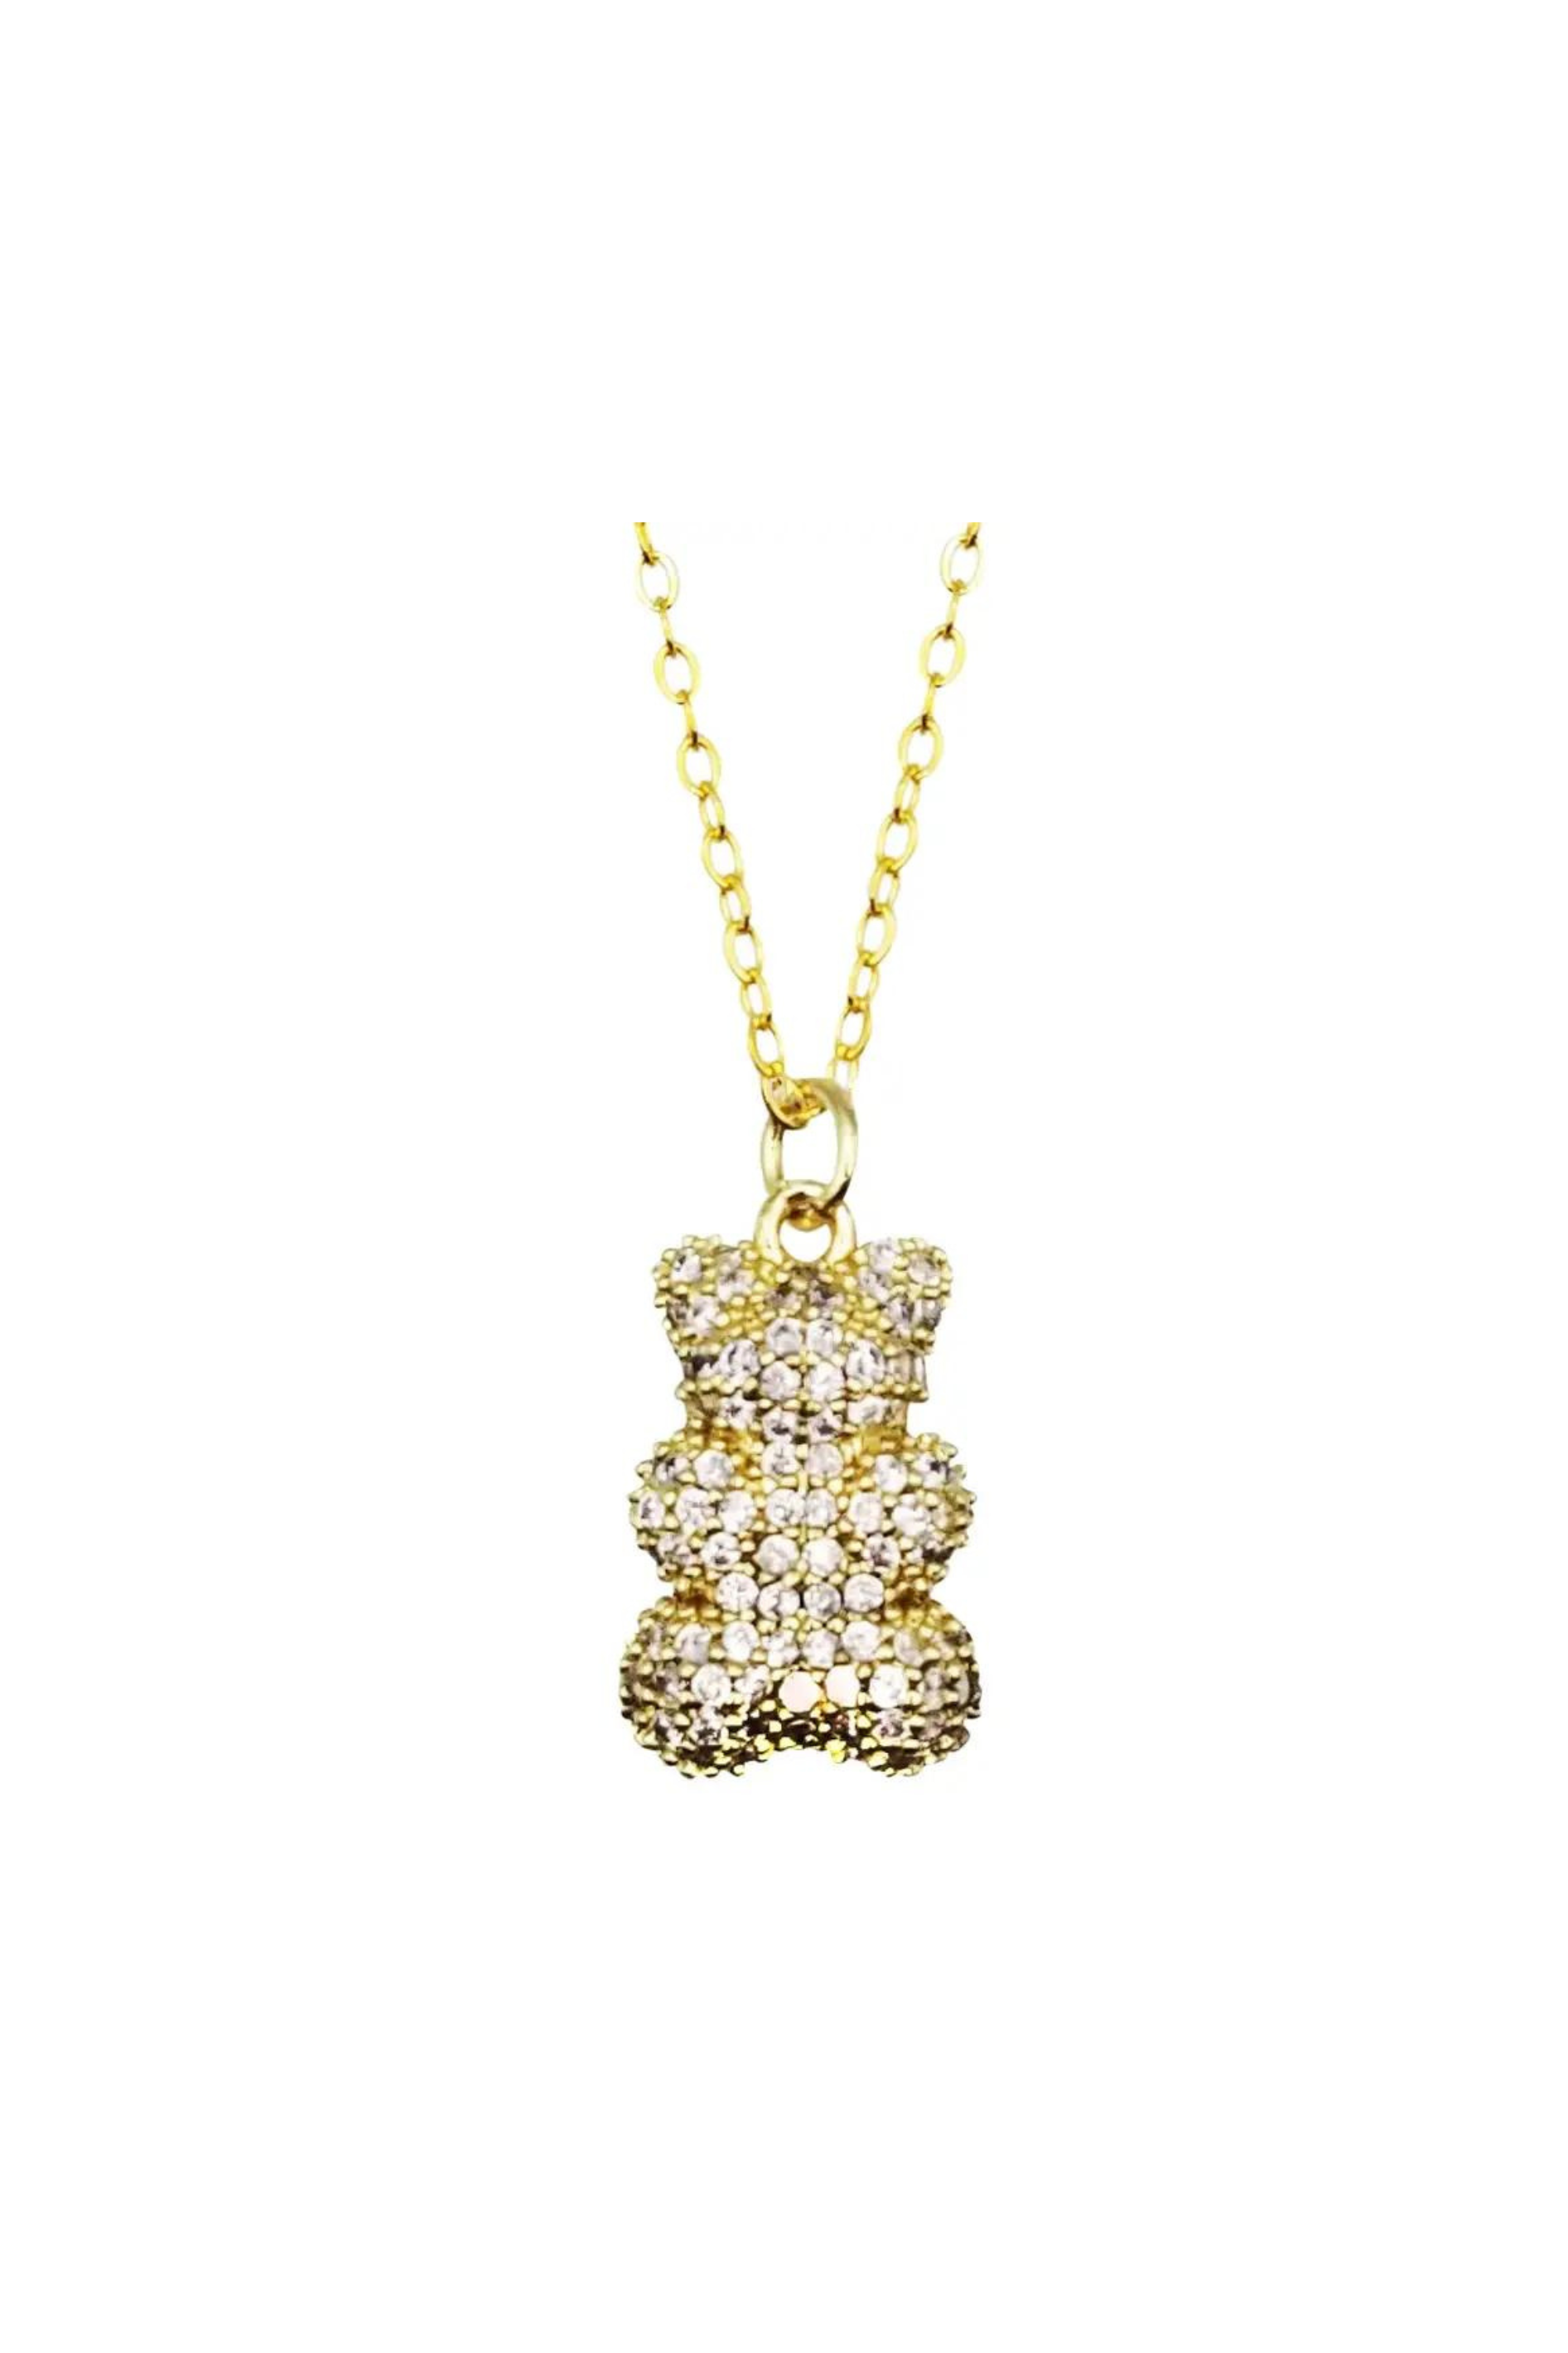 THE BLING KING Gold 3D Teddy Bear Pendant with Cuban Chain Necklace - Gold  Plated Jewellery with Decorative Stones, Moveable Head, Arms and Legs -  Chain Size: 4mm x 24